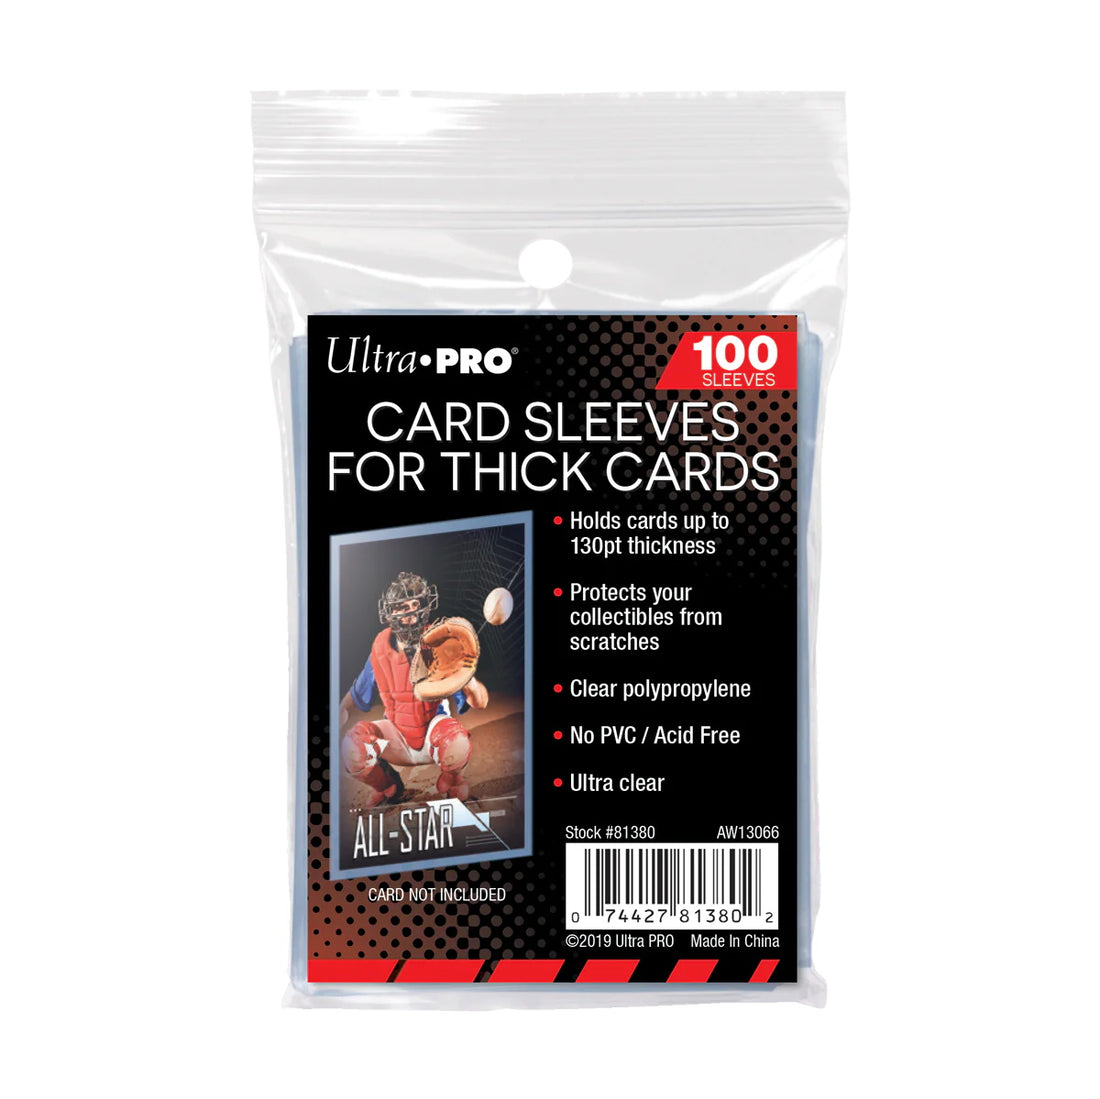 Ultra Pro Soft Sleeves 130pt Thick Cards (100 Stk)